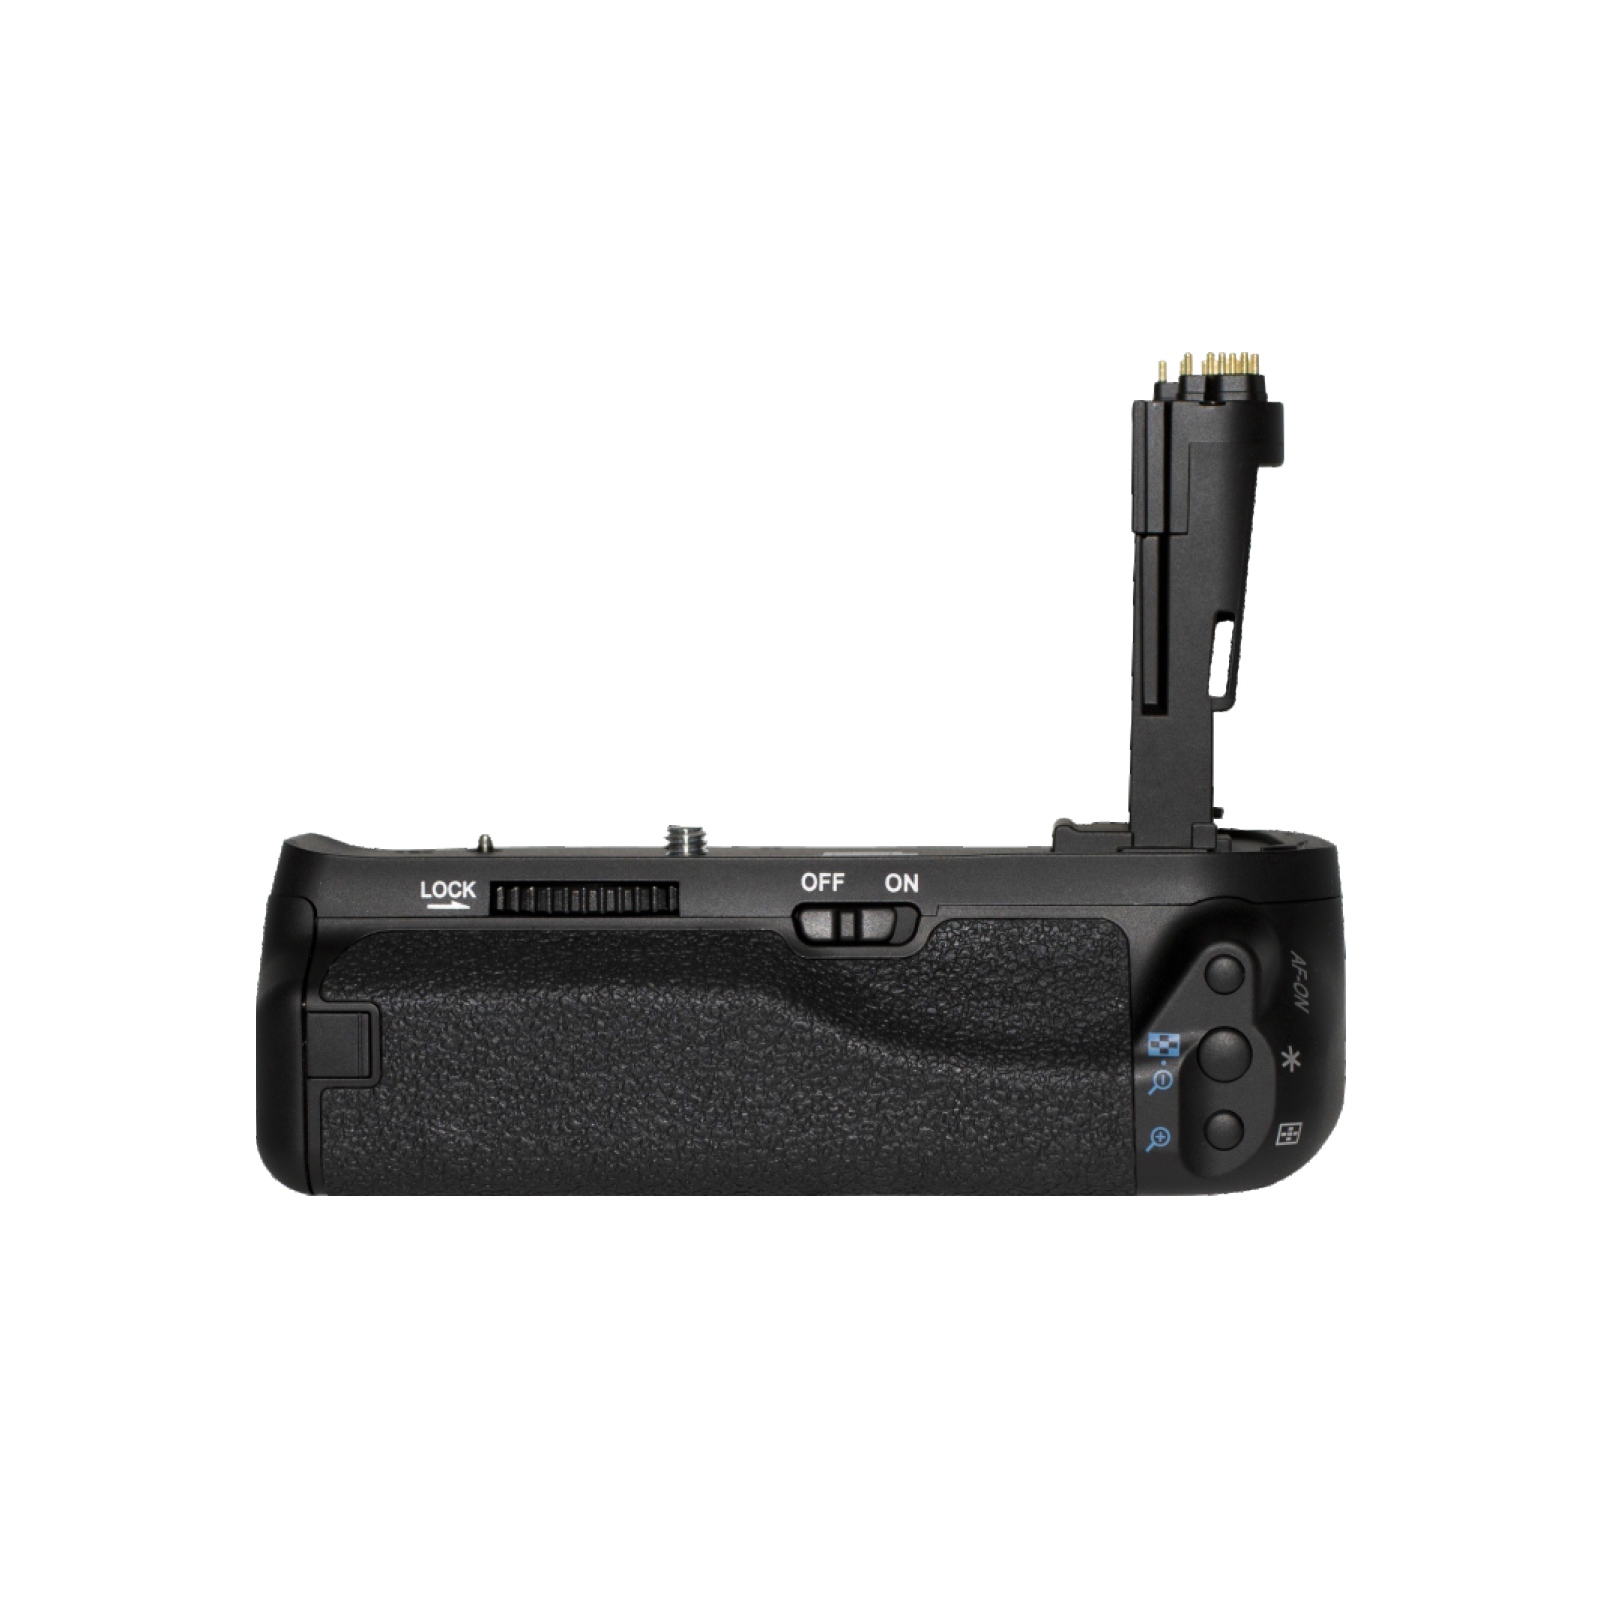 Pixel Vertax E21 Battery grip For Canon 6D Mark II, powerful endurance and arbitrary operation.